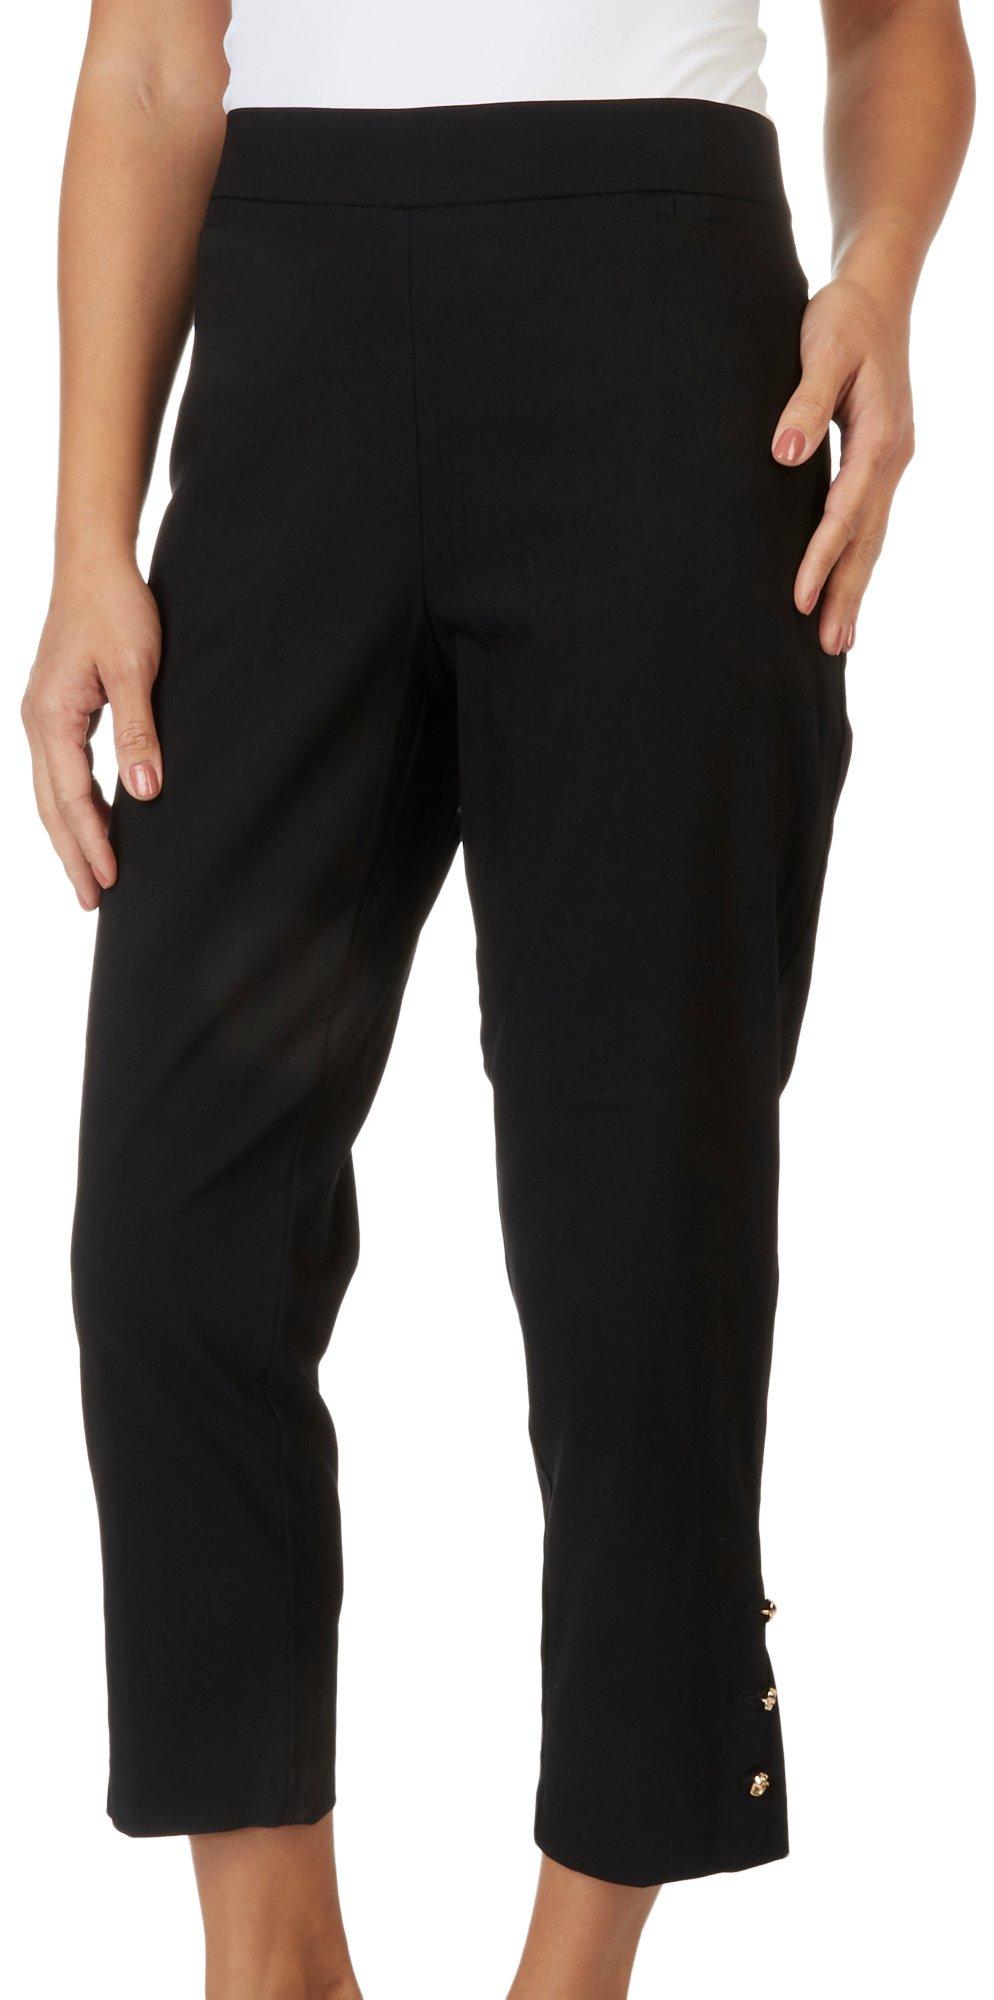 Counterparts Womens 24W Black Stretch Crop Capris Pants Pull On